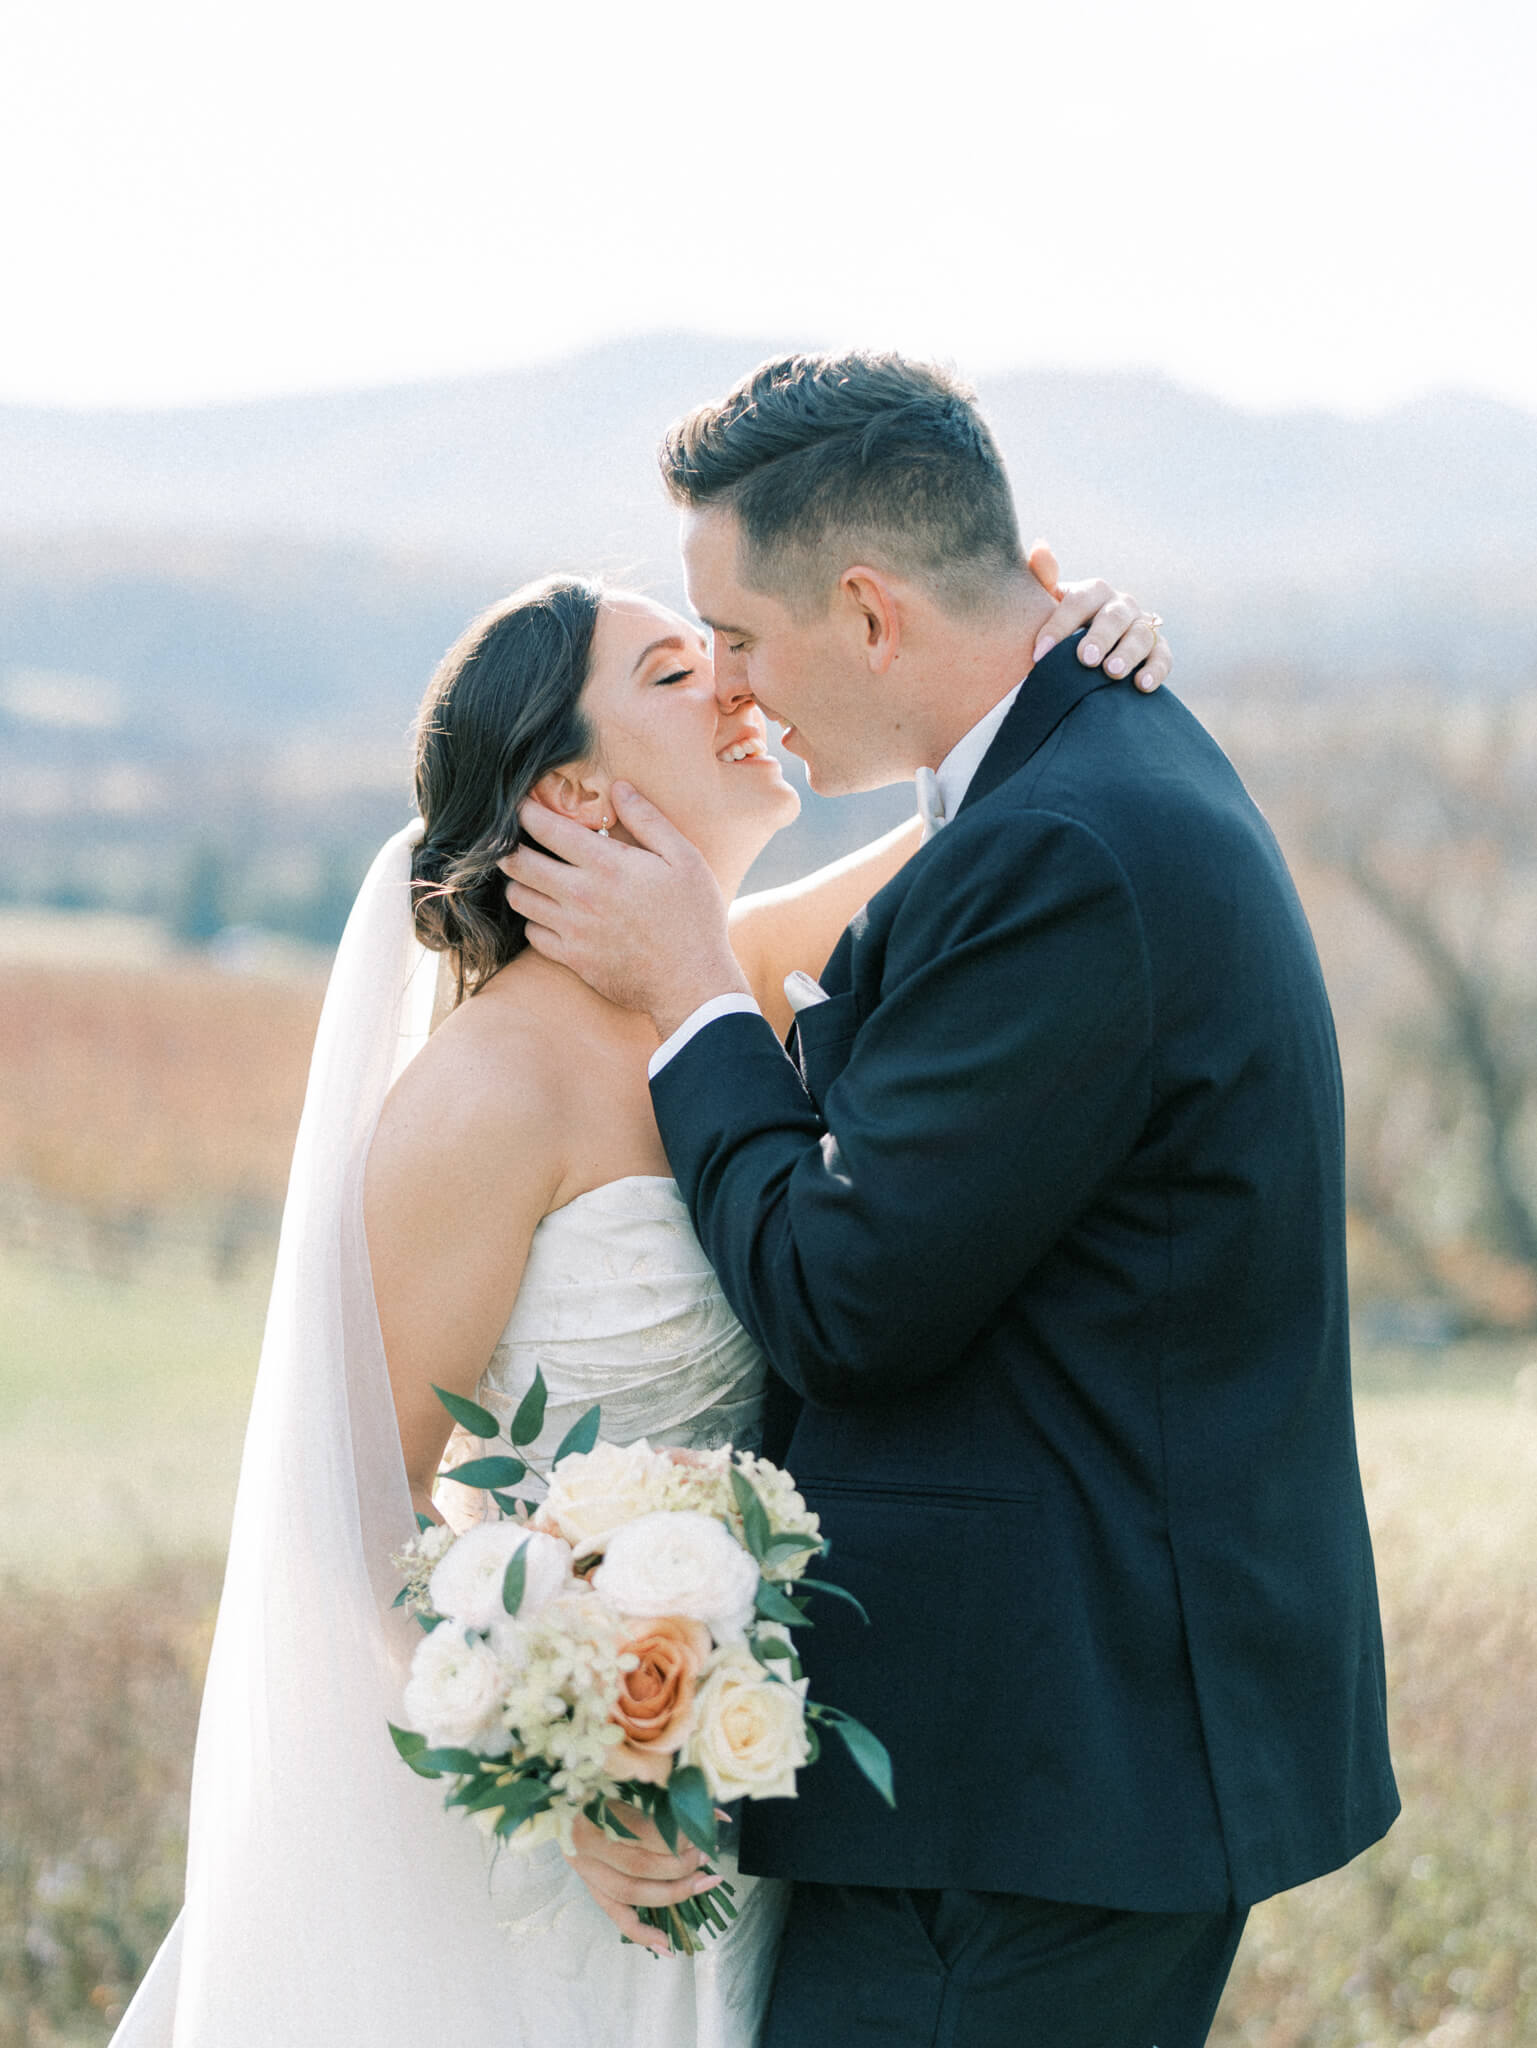 Closeup of a bride and groom kissing at a Pippin Hill wedding with the Blue Ridge Mountains in the background.